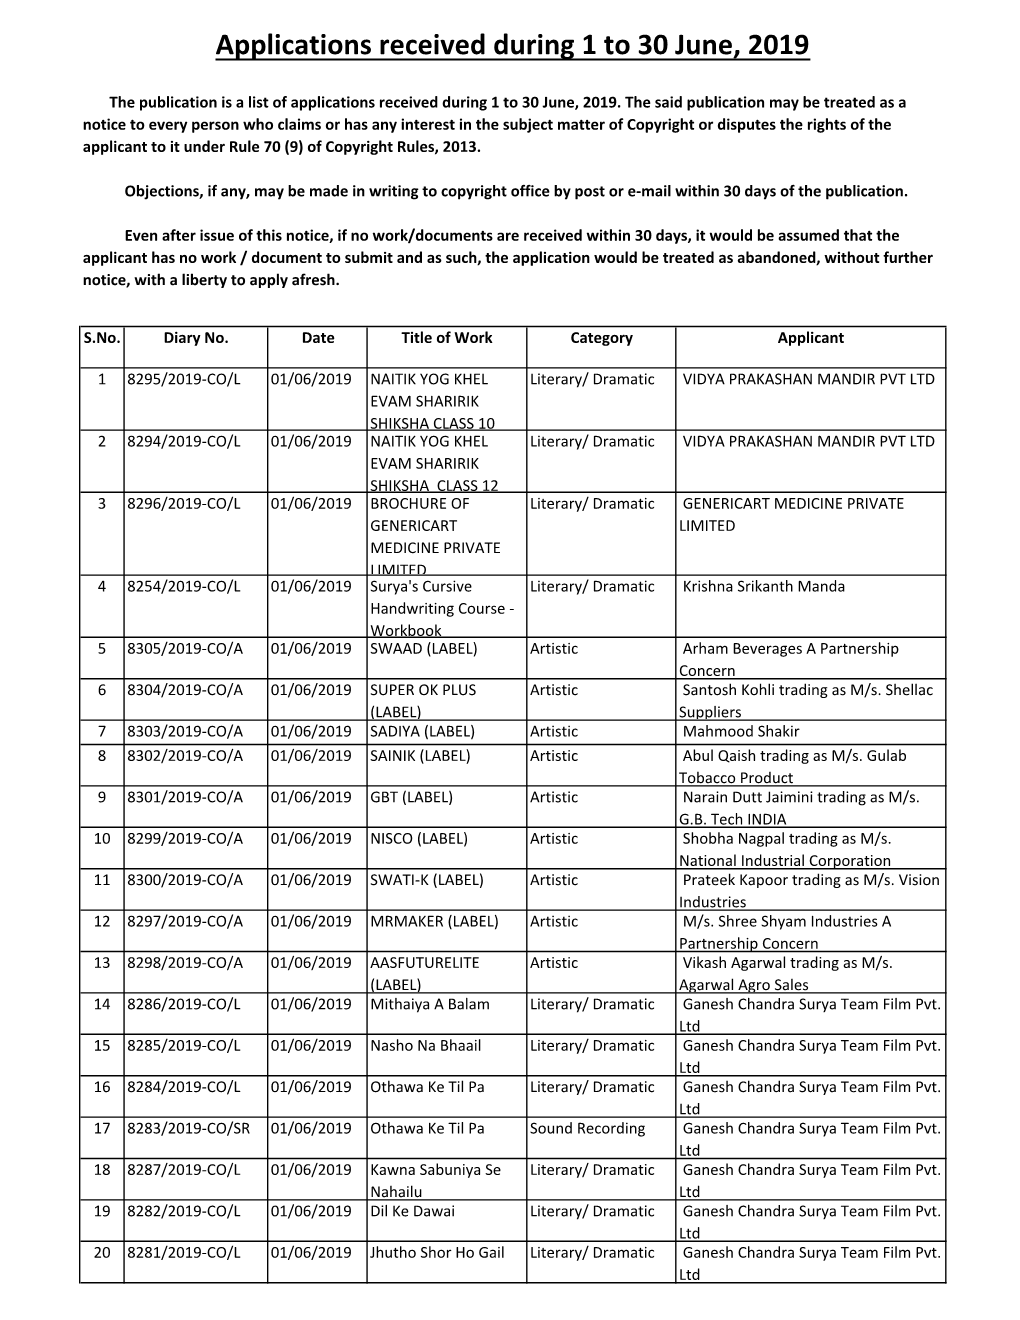 Applications Received During 1 to 30 June, 2019